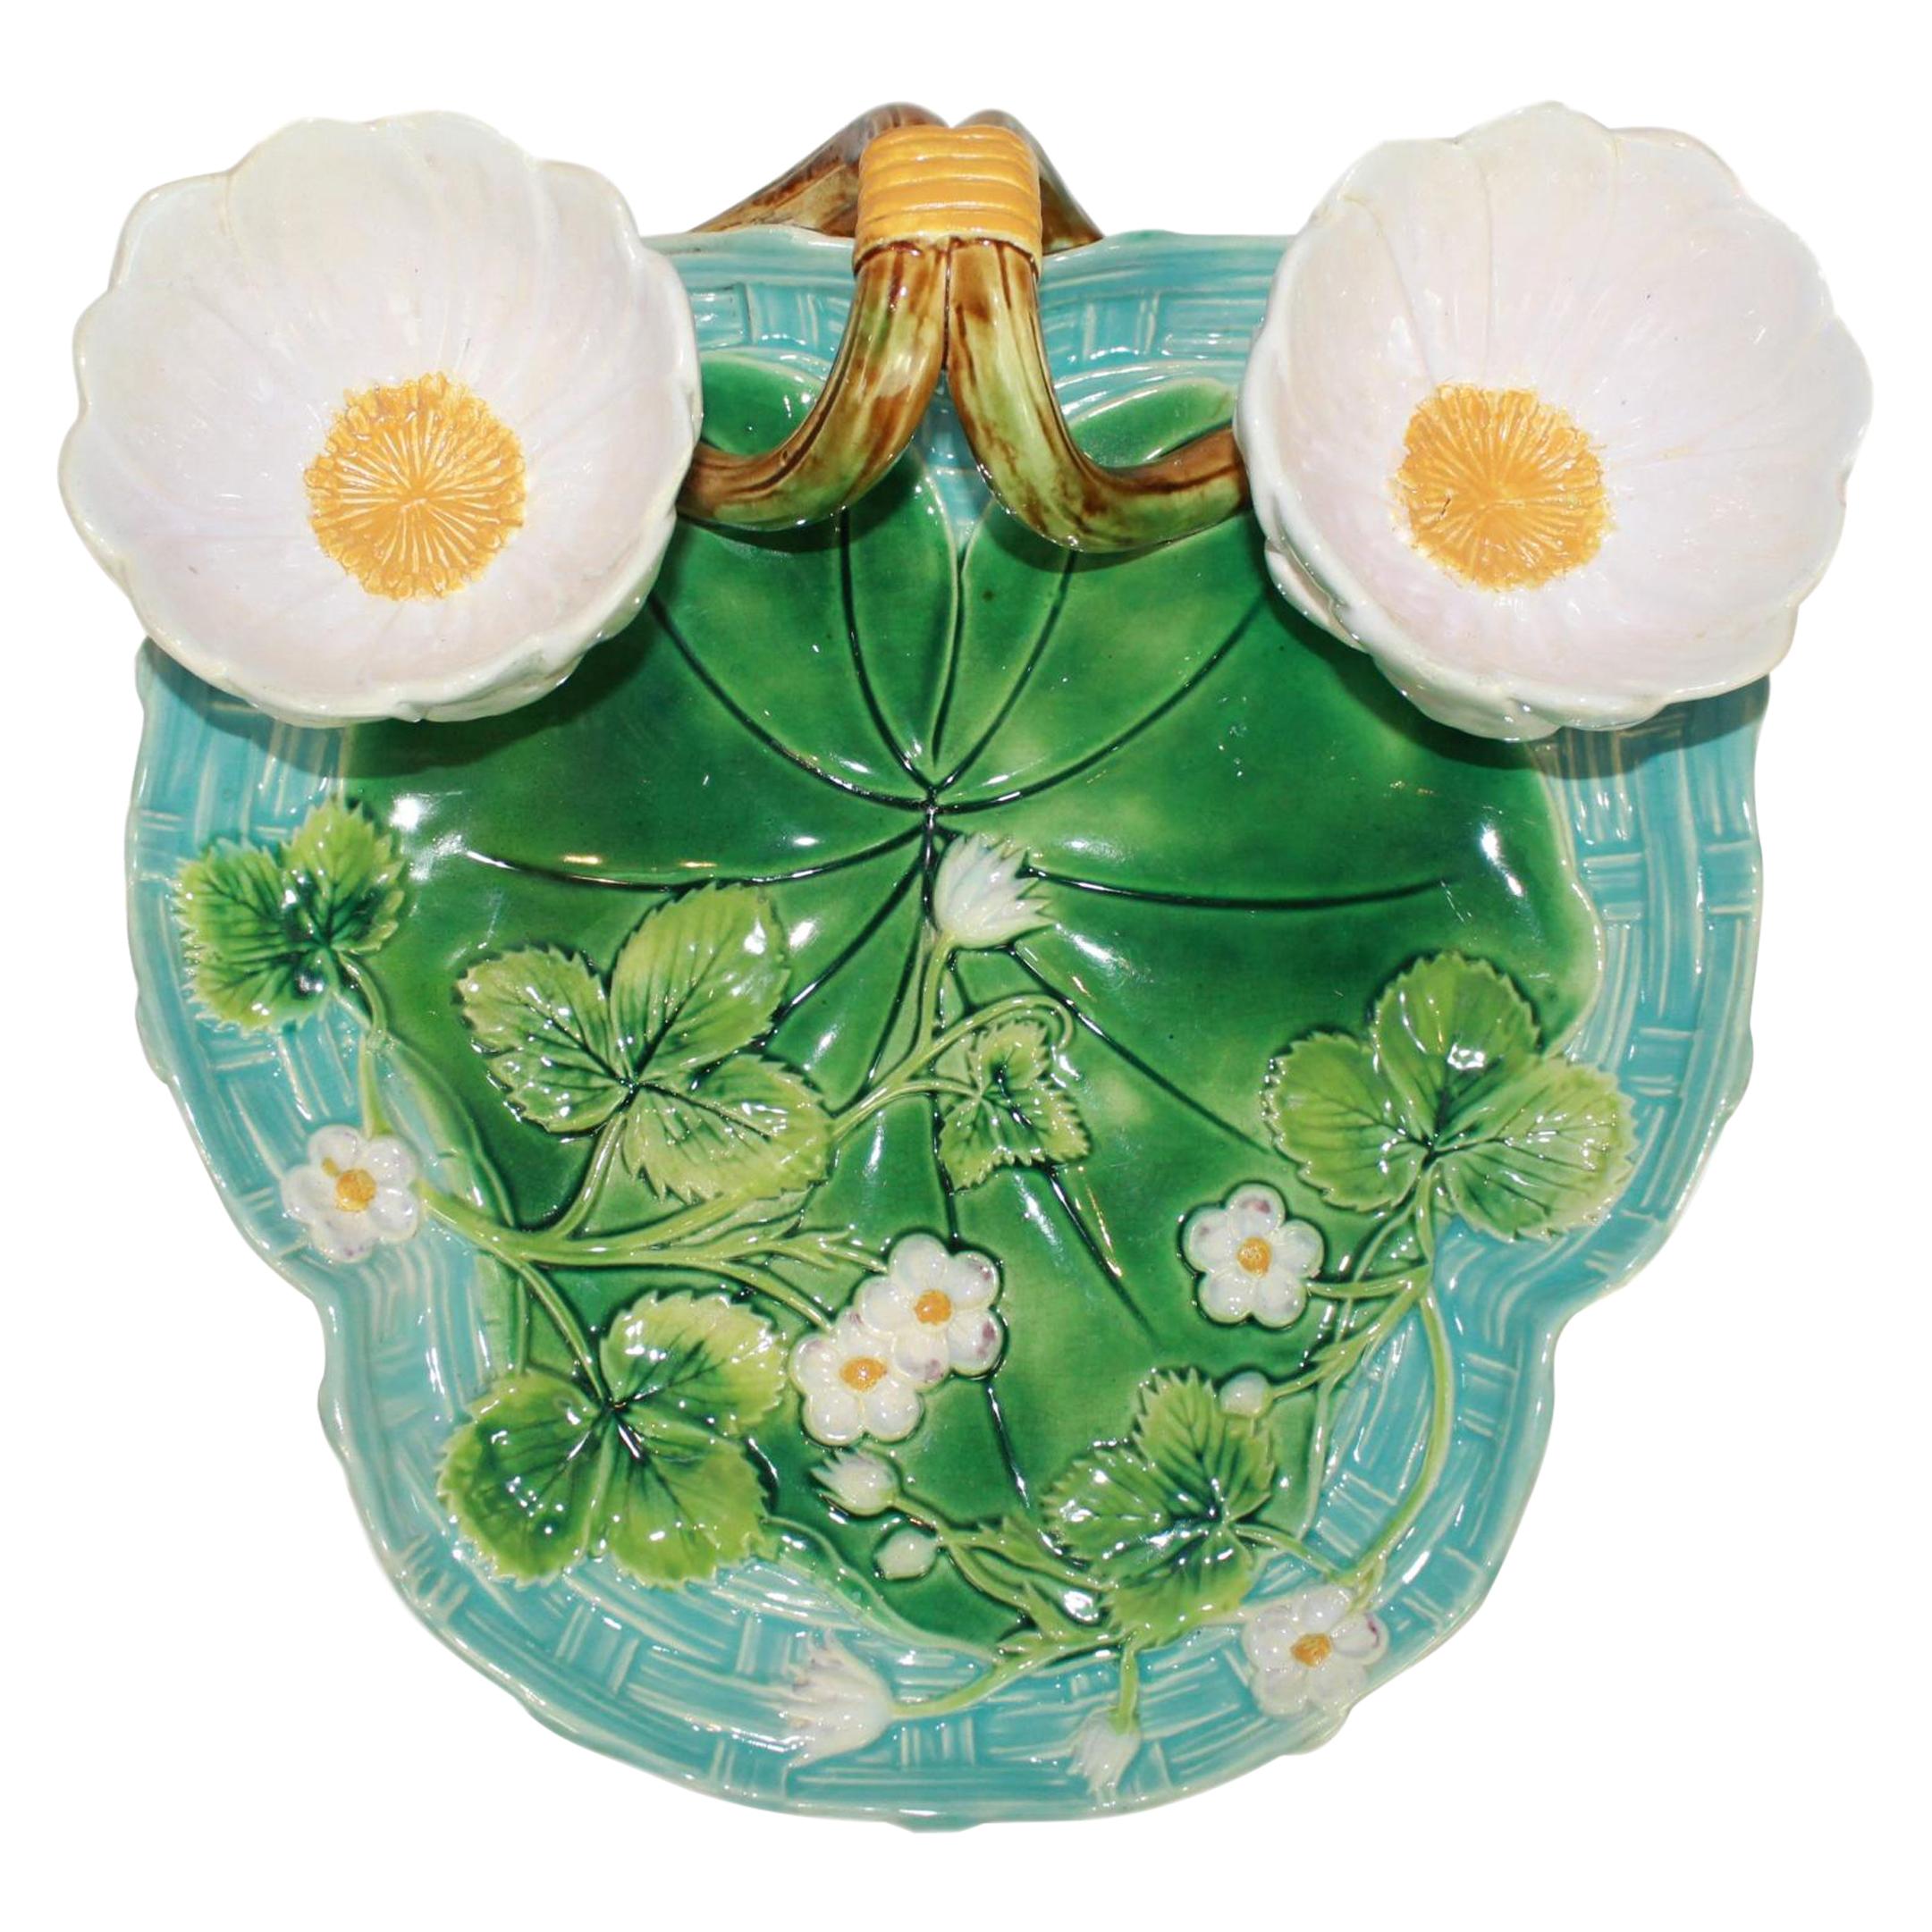 George Jones Majolica Strawberry Server Turquoise and Green, English, Dated 1877